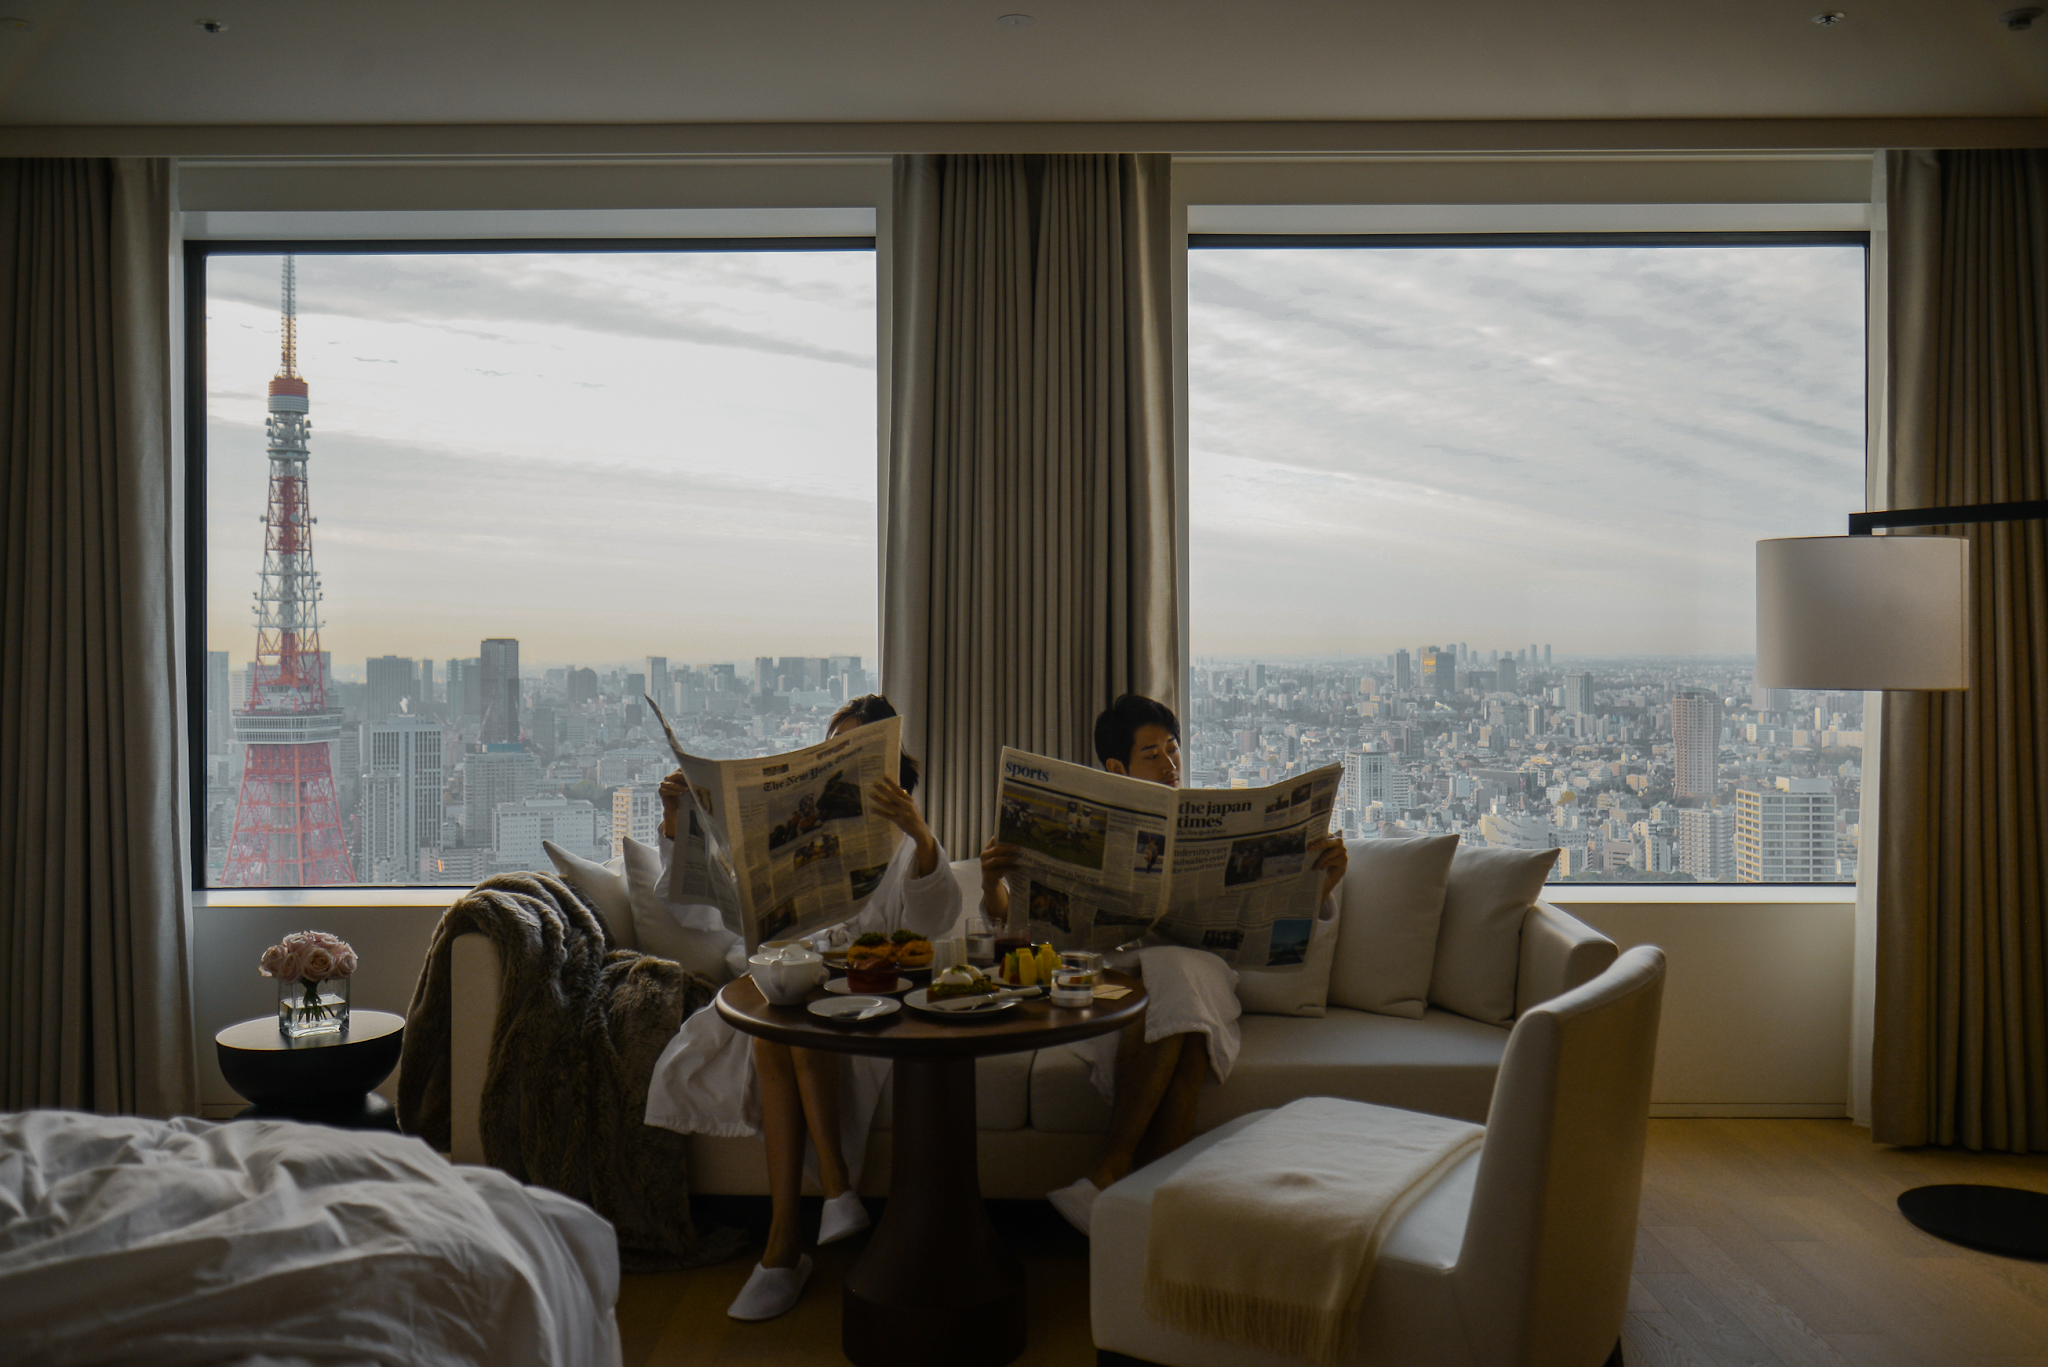 Morning photo ideas for couples, Best new hotel in Tokyo 2020, Staycation at the Tokyo Edition Toranomon,  hotel staycation in Tokyo, Japan newest hotels, Tokyo Tower view hotels in Japan, best Tokyo skyline view with Tokyo Tower / FOREVERVANNY Travel and Style by Van Le